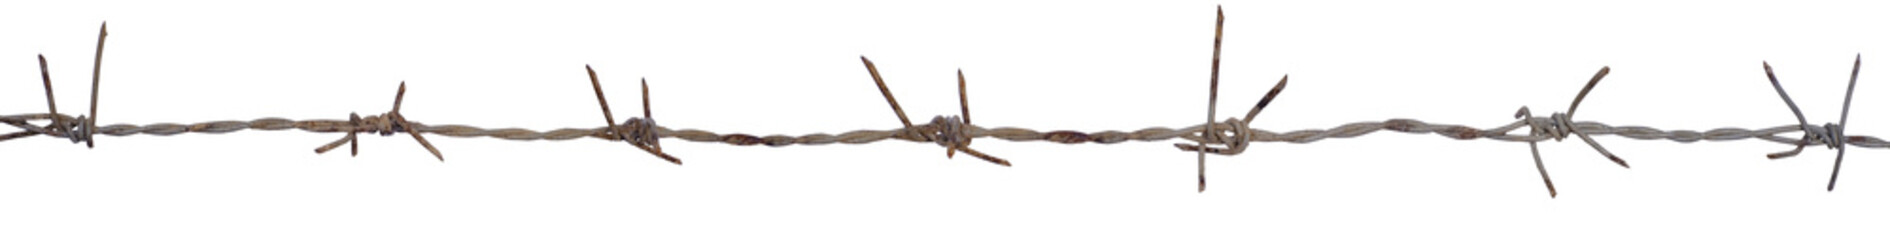 Old barbed wire stretched in a straight line